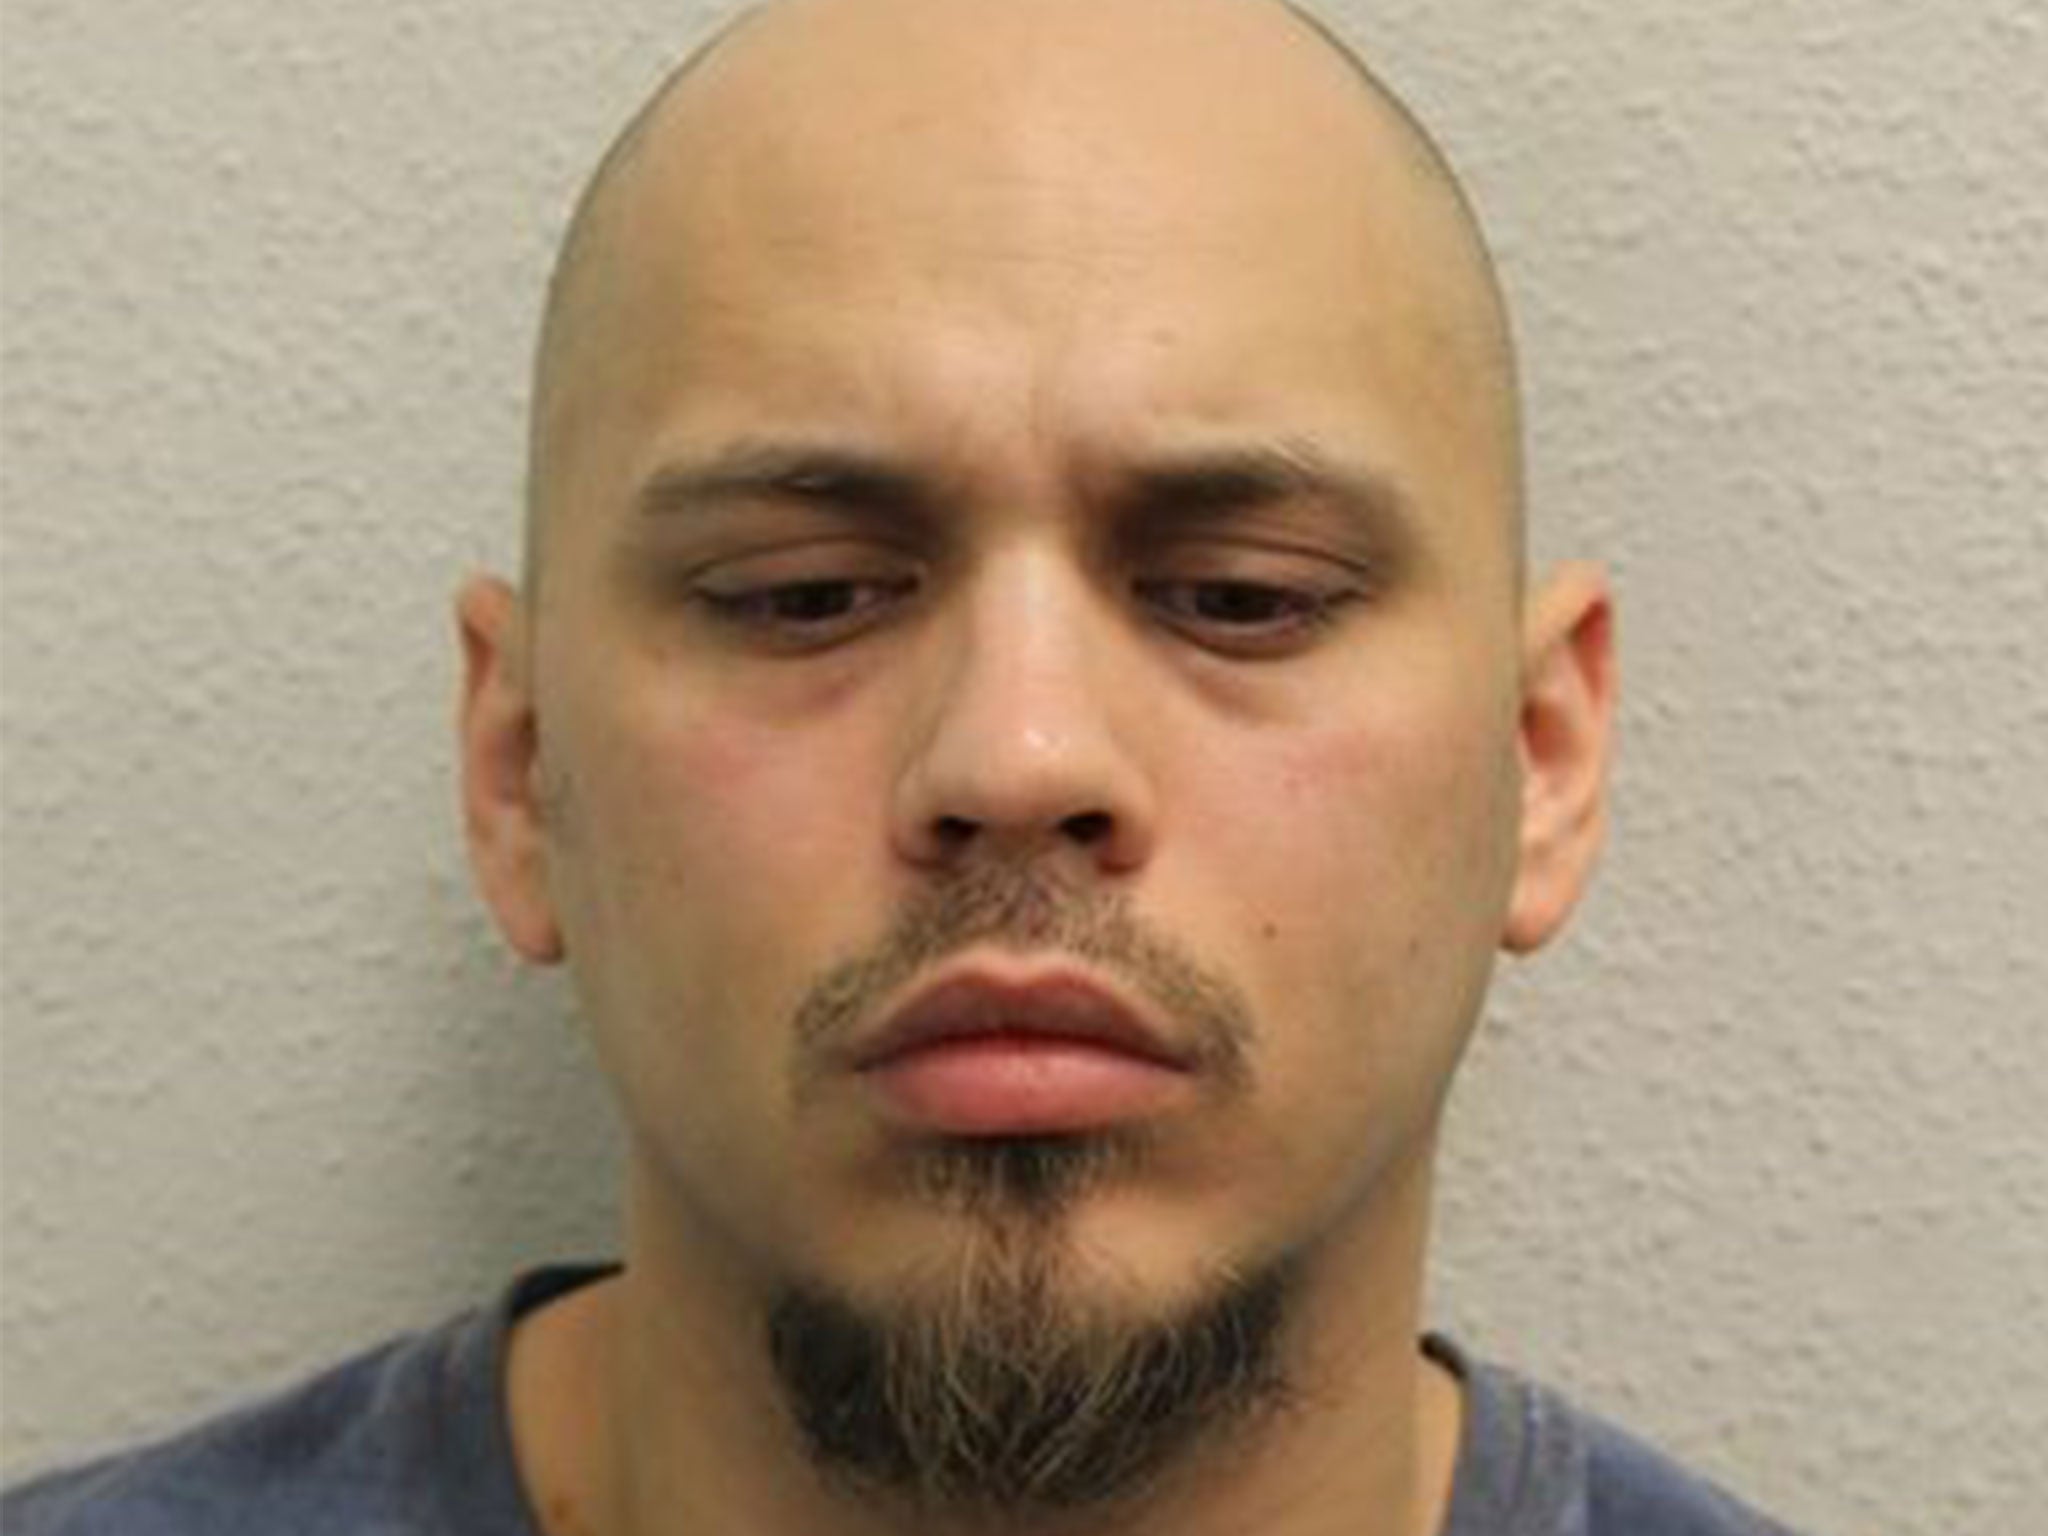 Police are trying to trace Peter Morley, who is wanted in connection with a stabbing in Woolwich